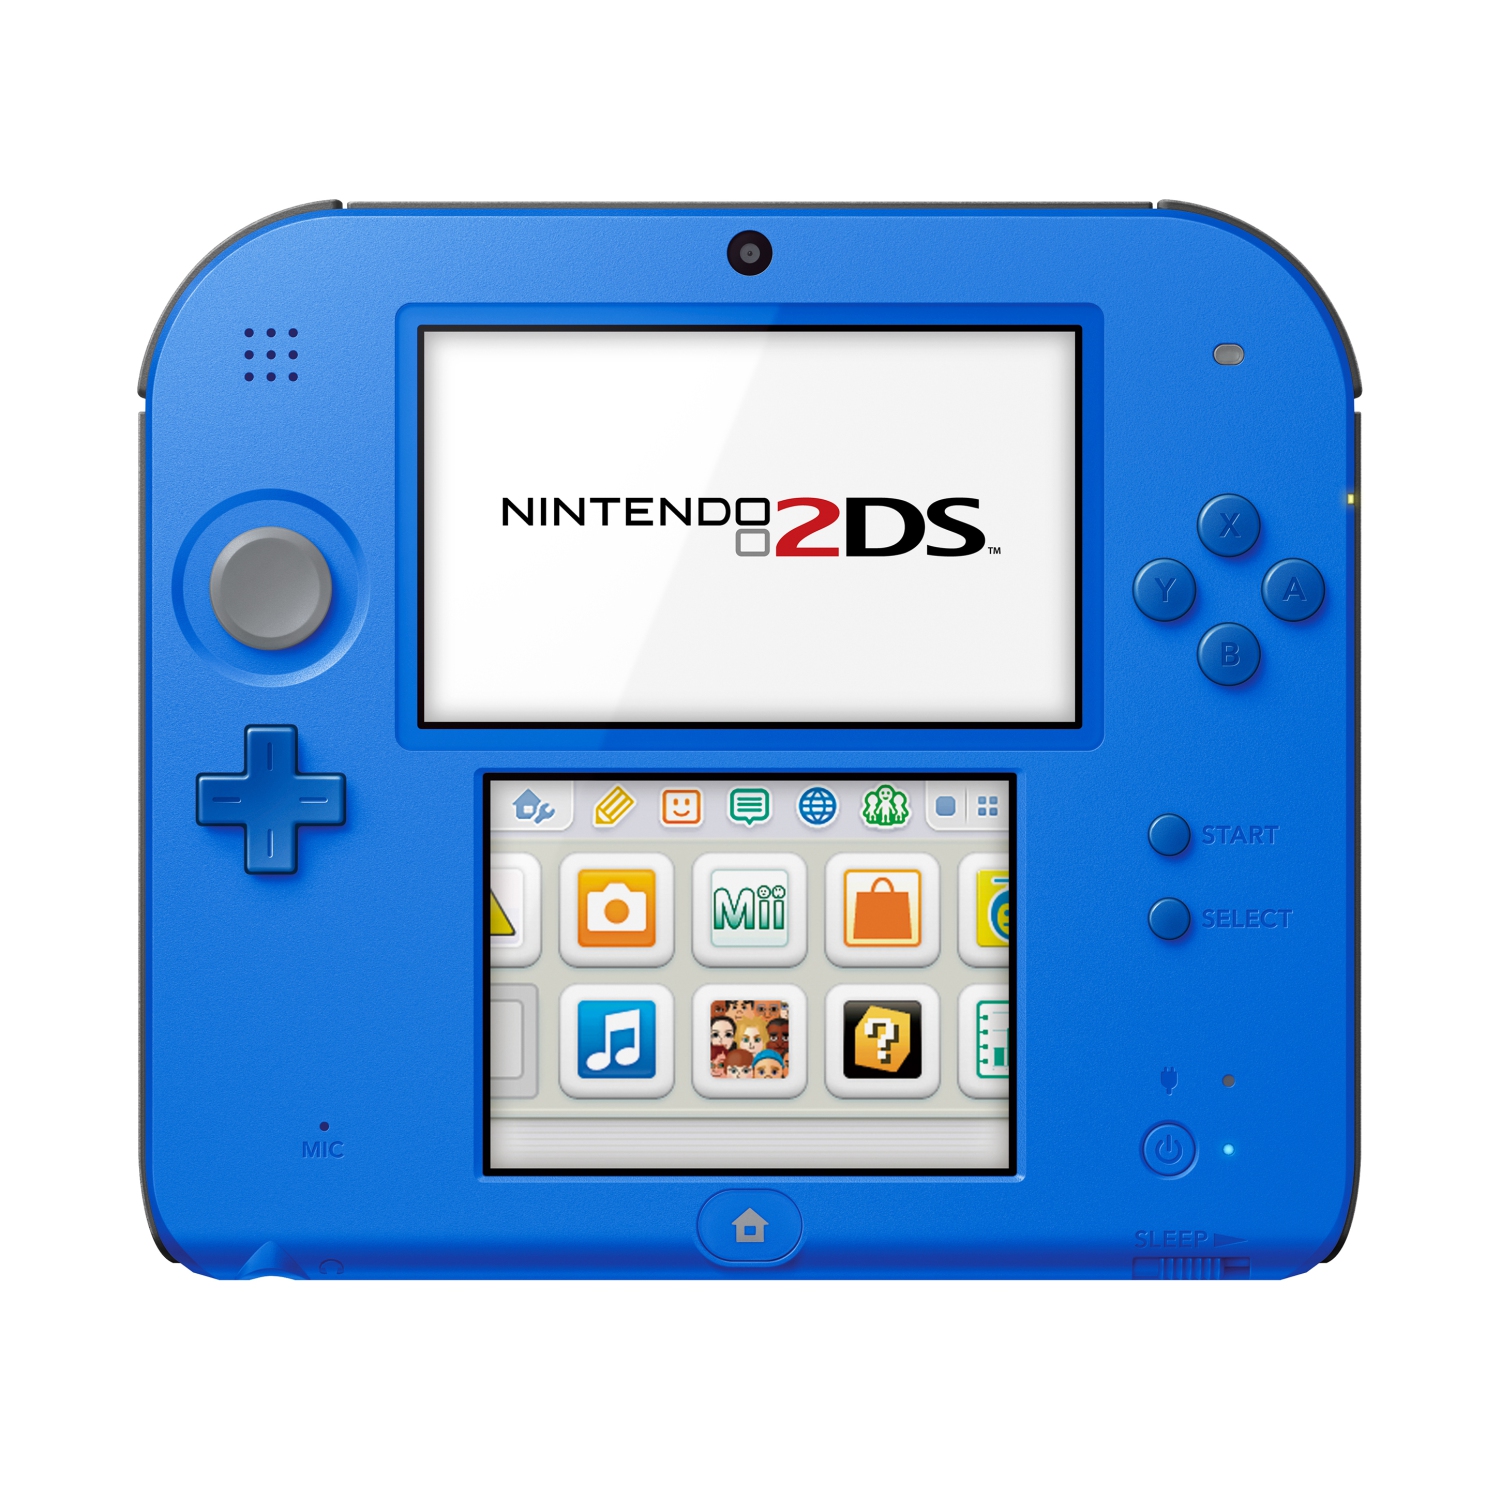 Refurbished (Good) - Nintendo 2DS - Electric Blue with New Super Mario Bros. 2 Game Pre-Installed,